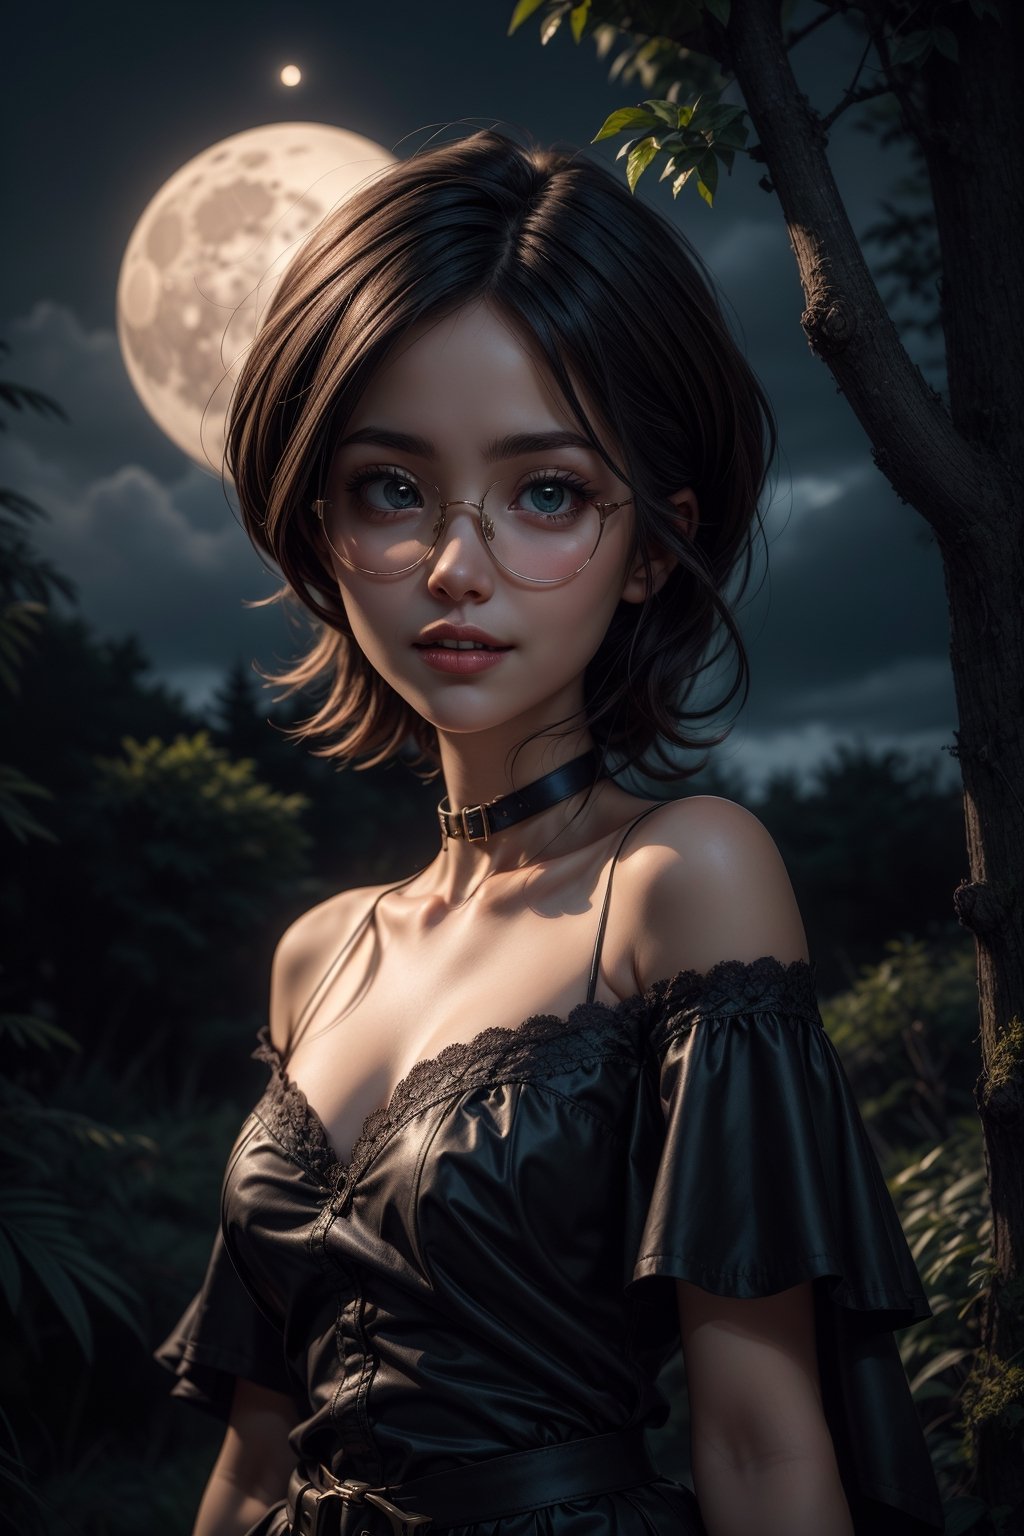 A hauntingly beautiful and high-quality illustration of a female vampire dressed in traditional Celtic attire. She has captivating green eyes, wearing glasses, megane, short hair, red, and messy hair, and a chilling smile. off shoulder, collar, collarbone. The vampire stands in the midst of a tragic, gothic forest at night, with a looming moon casting eerie shadows on the stormy sky. The intricate details of her outfit and the detailed Irish background create a cinematic view reminiscent of the style by Moebius. The high level of detail in her skin and the overall masterpiece quality make this a truly mesmerizing graphic novel illustration.